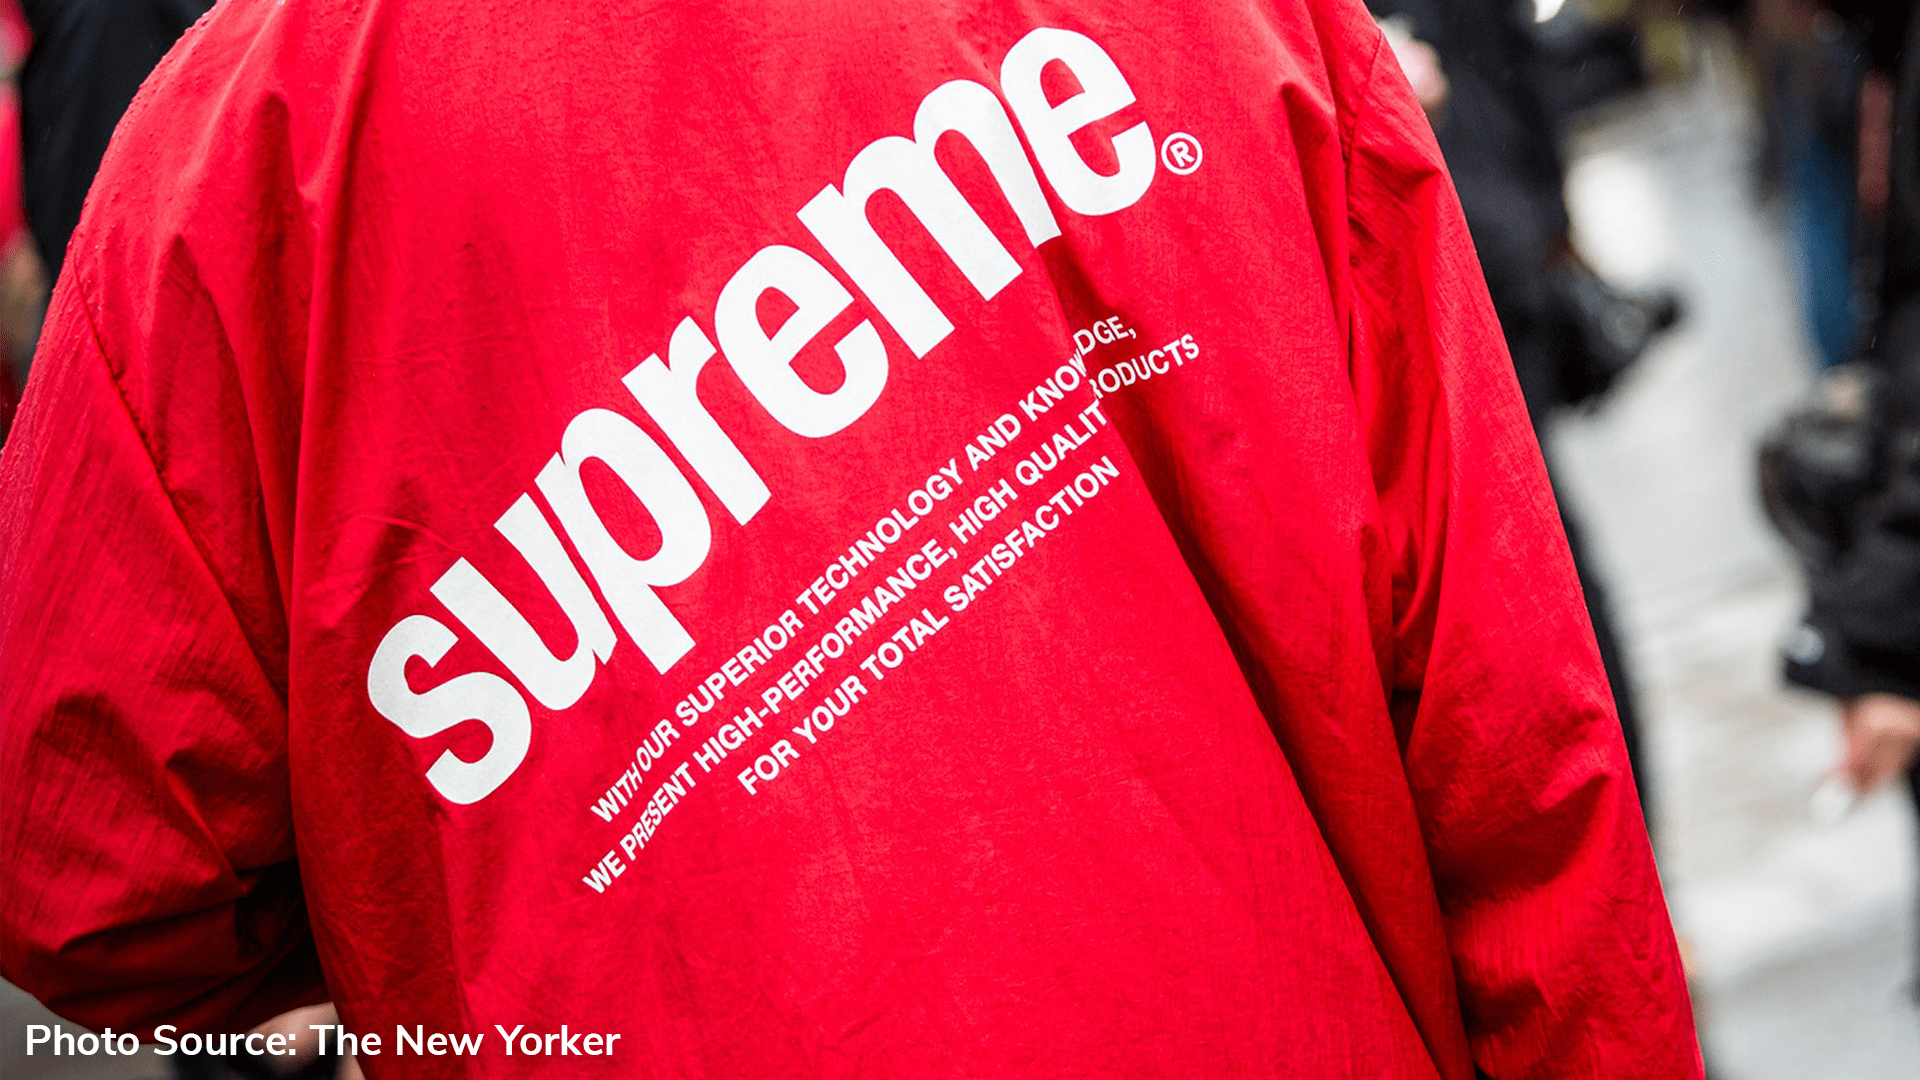 Supreme joins the Vans and North Face family in deal worth $2.1